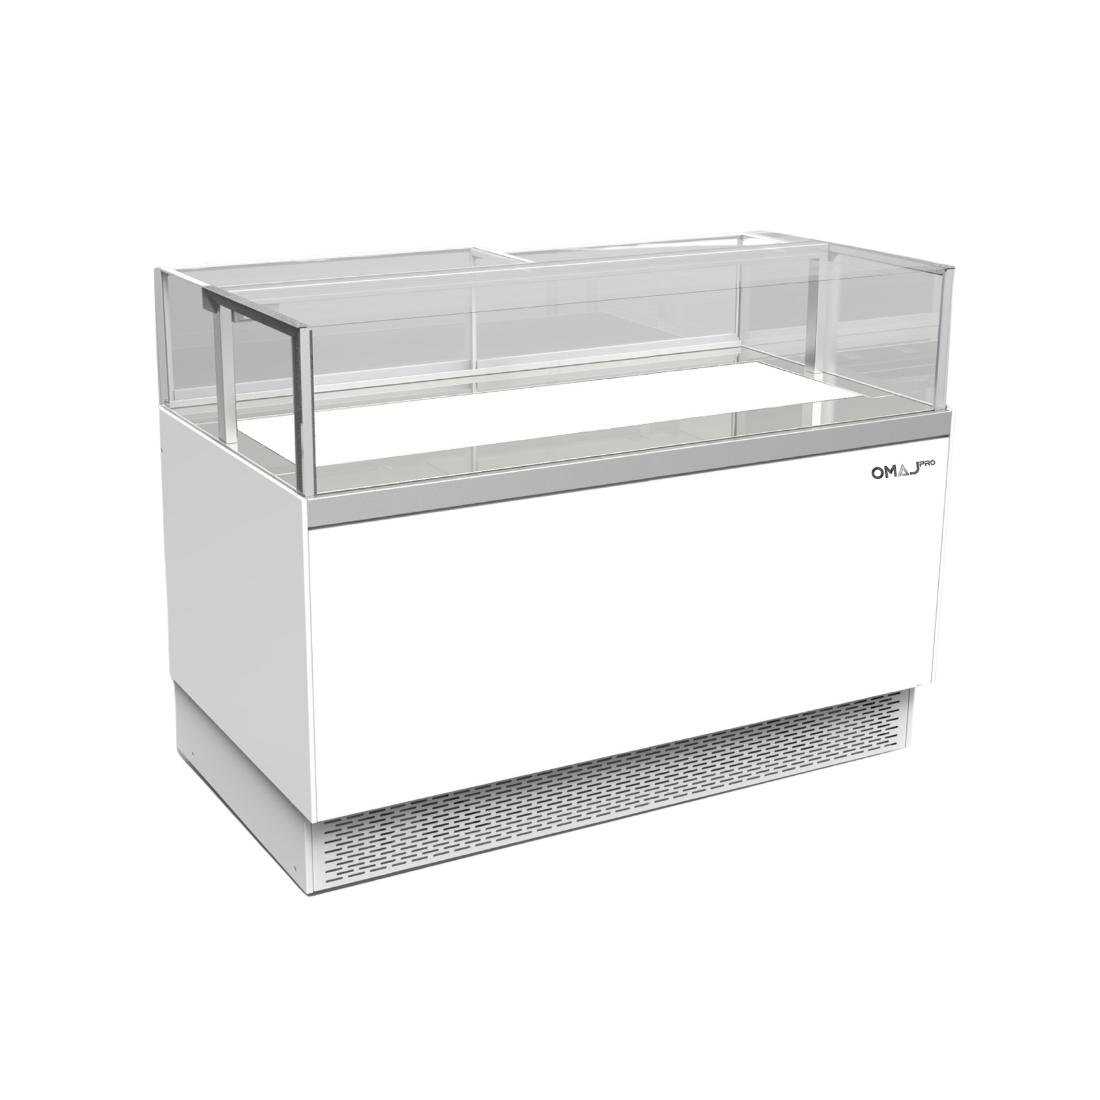 OMAJ PRO ,DICS1800, Display Show Cake and Chocolate Case Bottom With Drawer White 180 cm|mkayn|مكاين